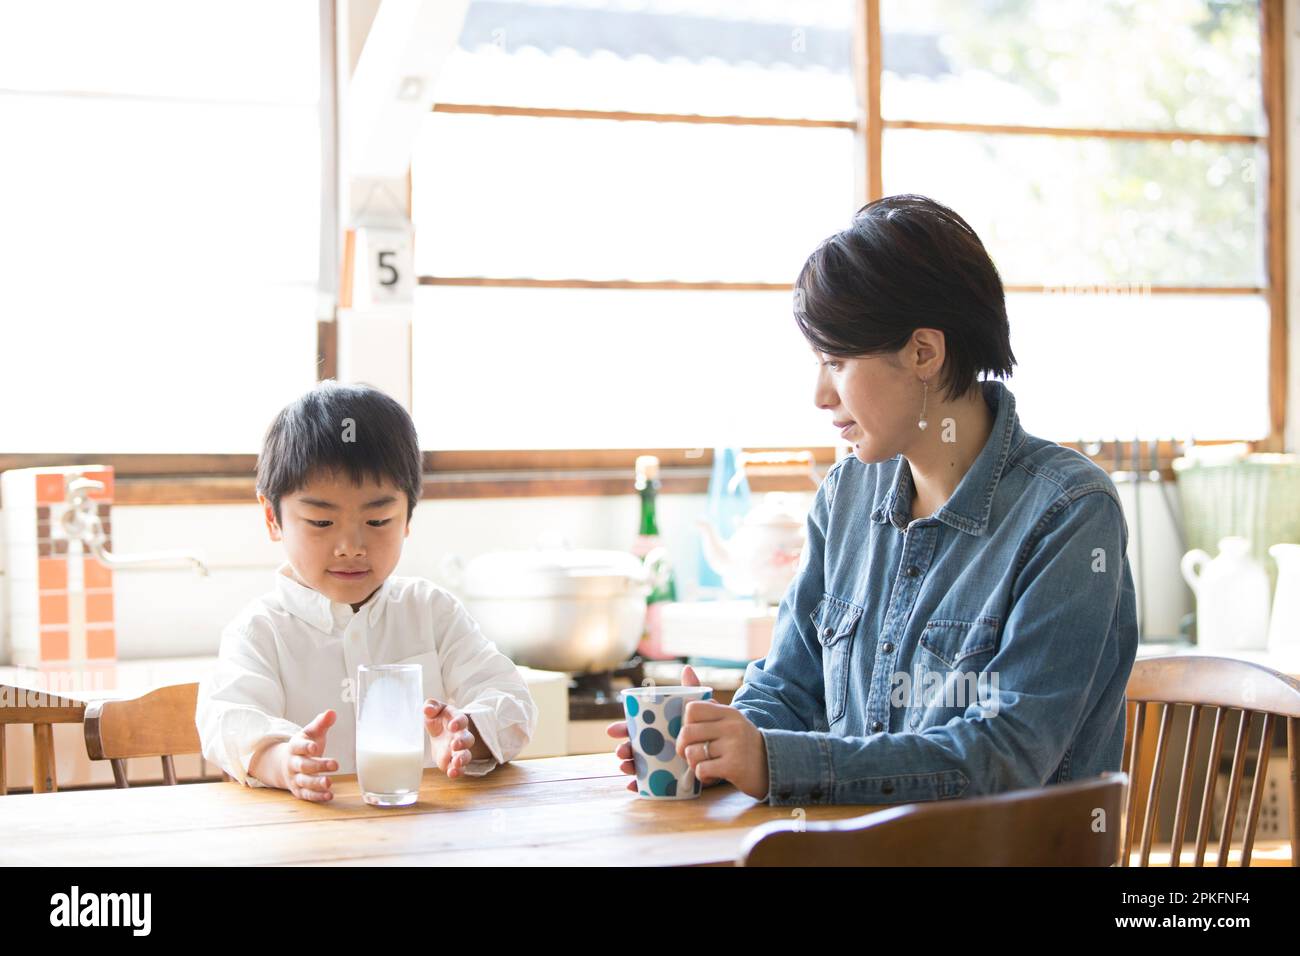 Boy drinking milk with his mother Stock Photo